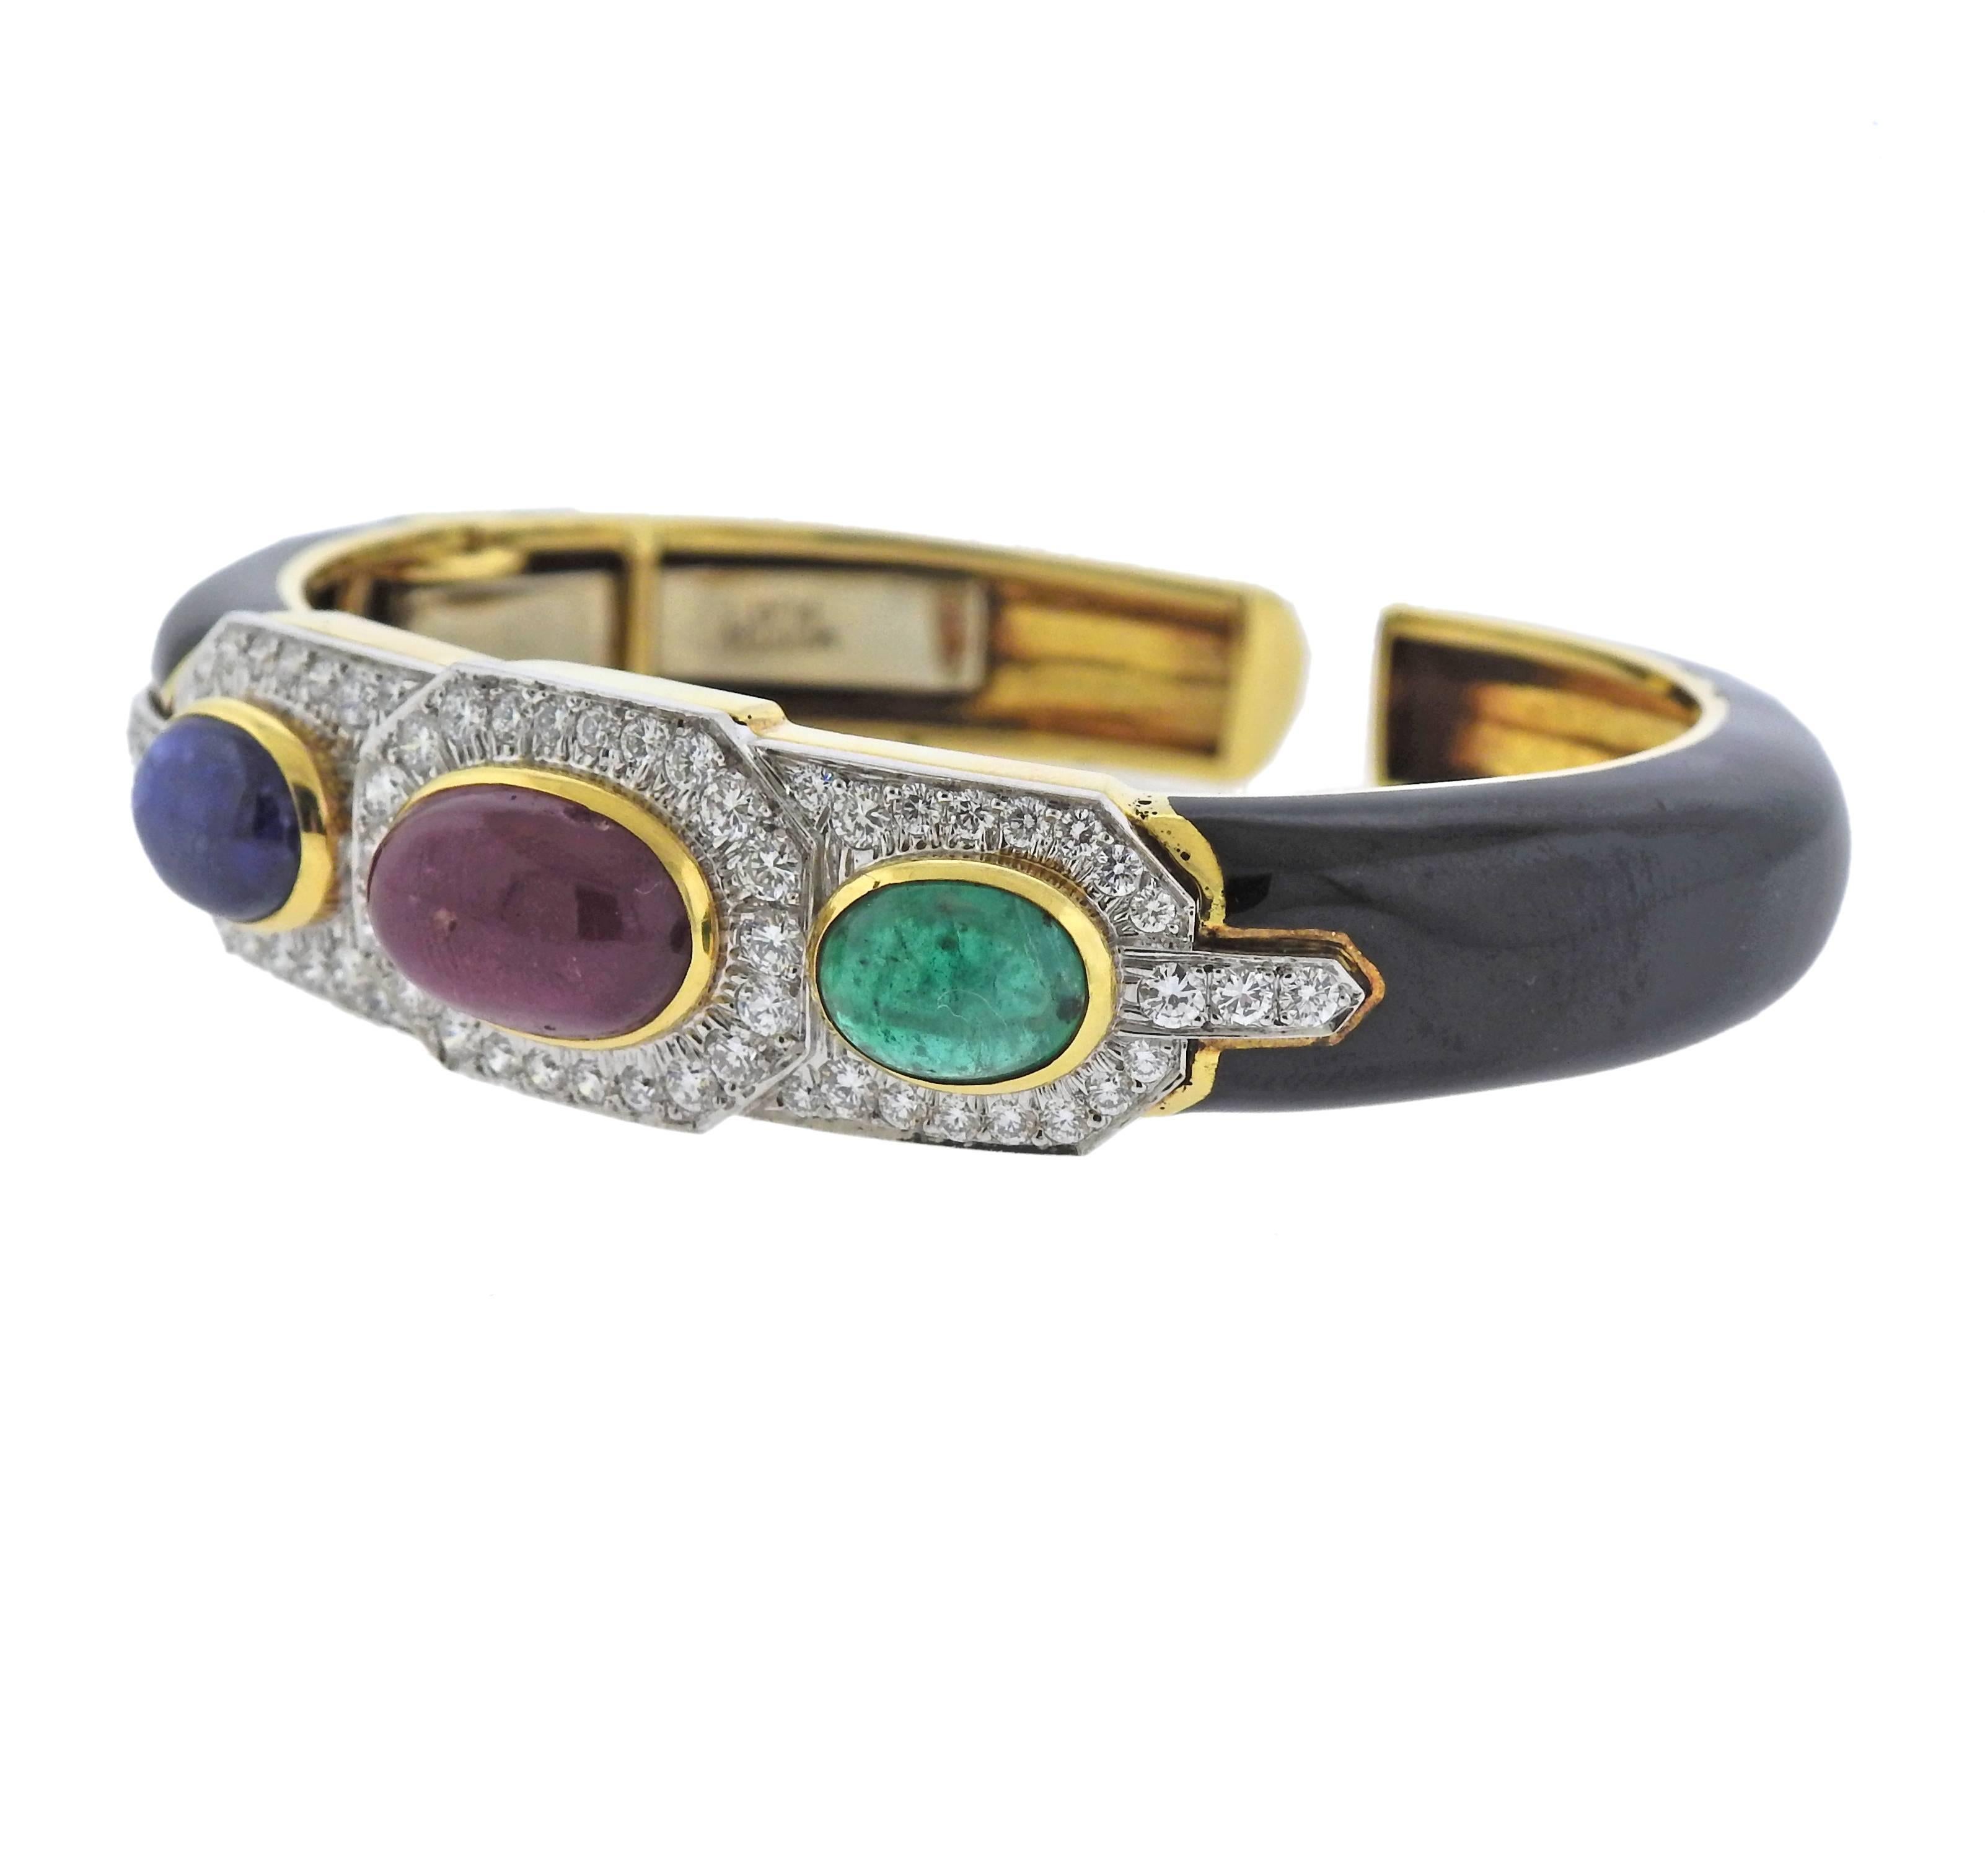 18k gold platinum bracelet crafted by David Webb featuring approximately 2.40ctw of H/VS diamonds, ruby, emerald, sapphire cabochons. Bracelet is will fit approx. 6.75